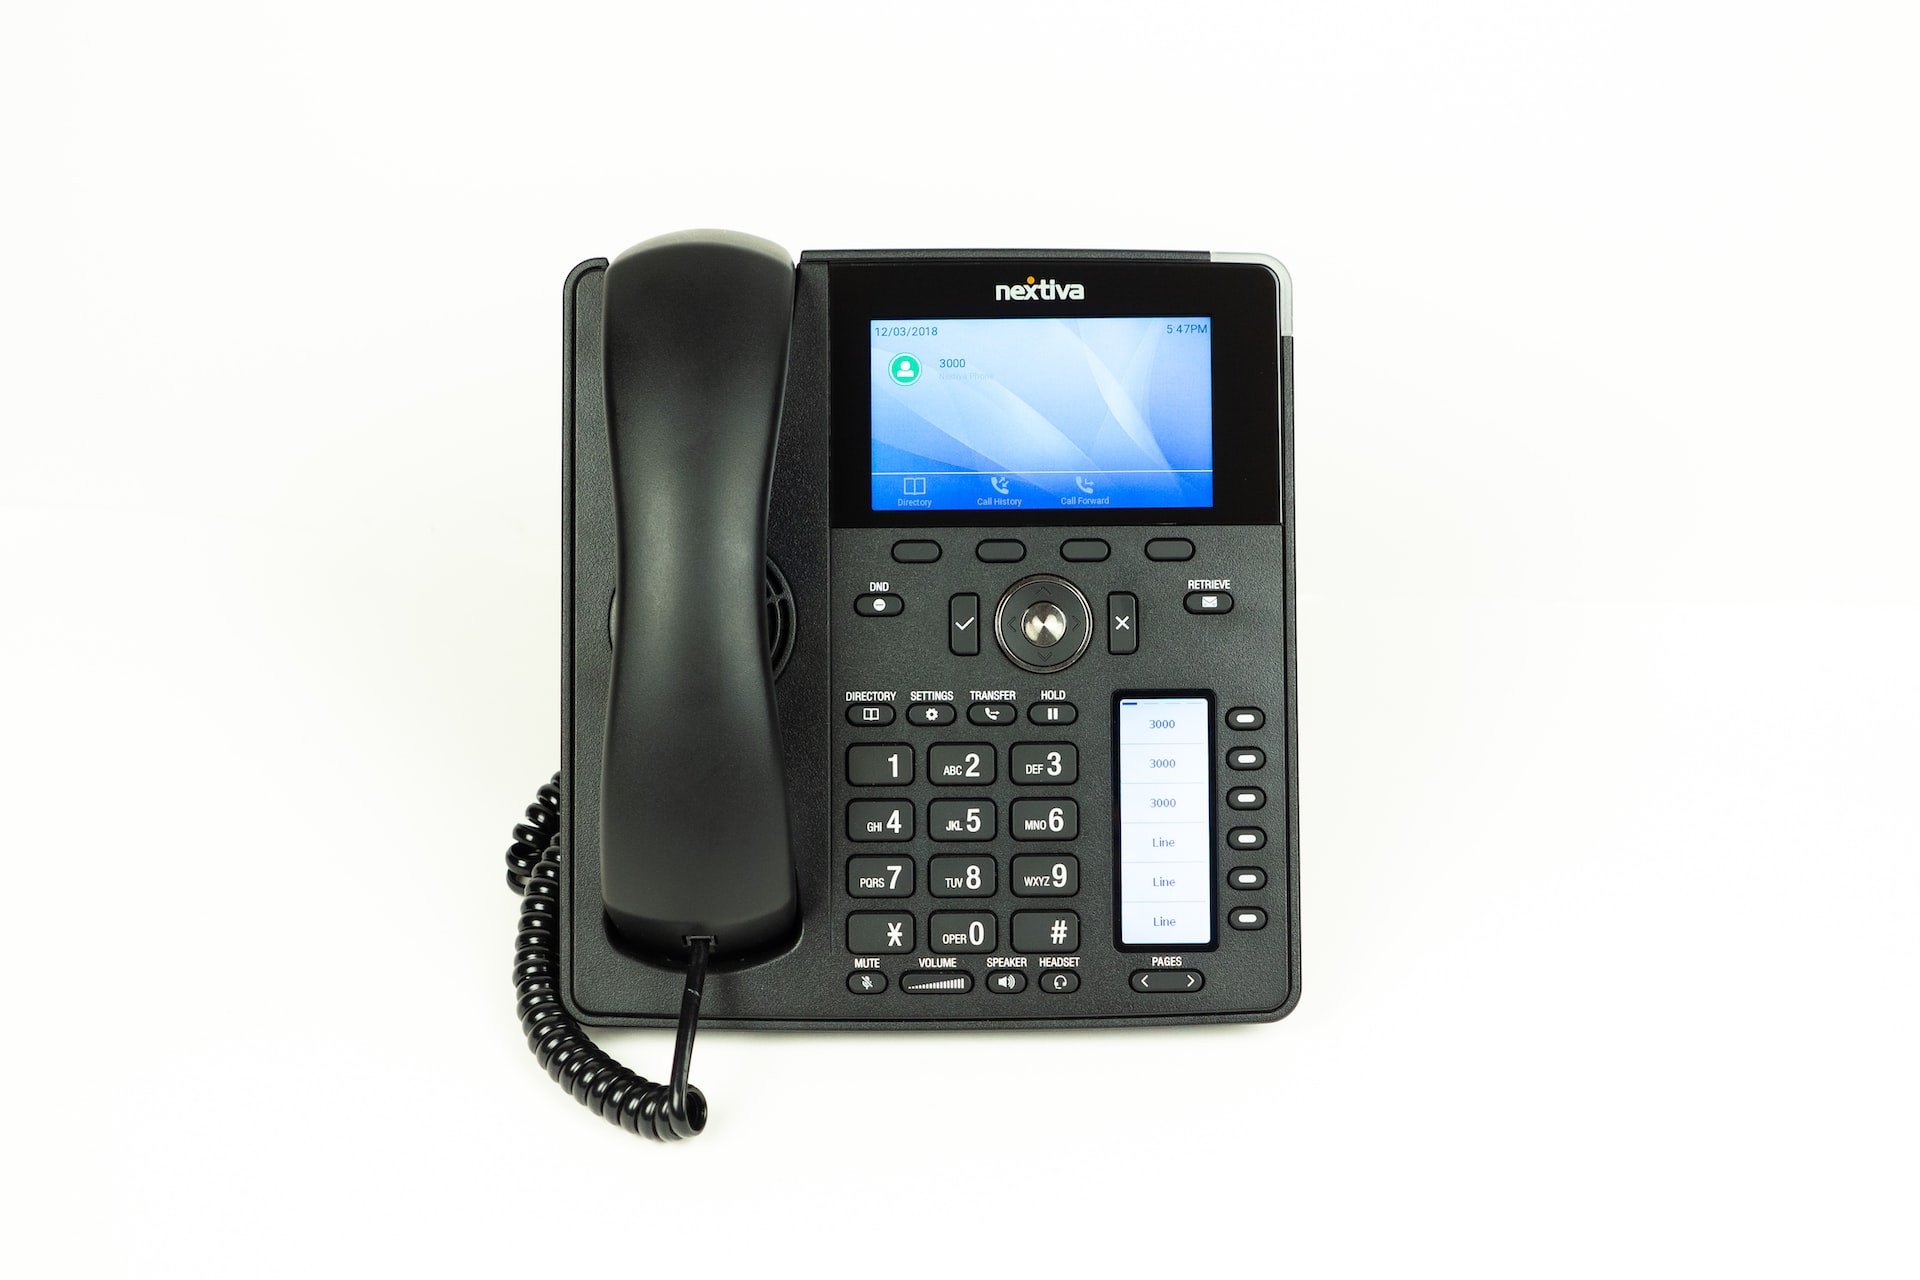 VoIP Providers in the UK